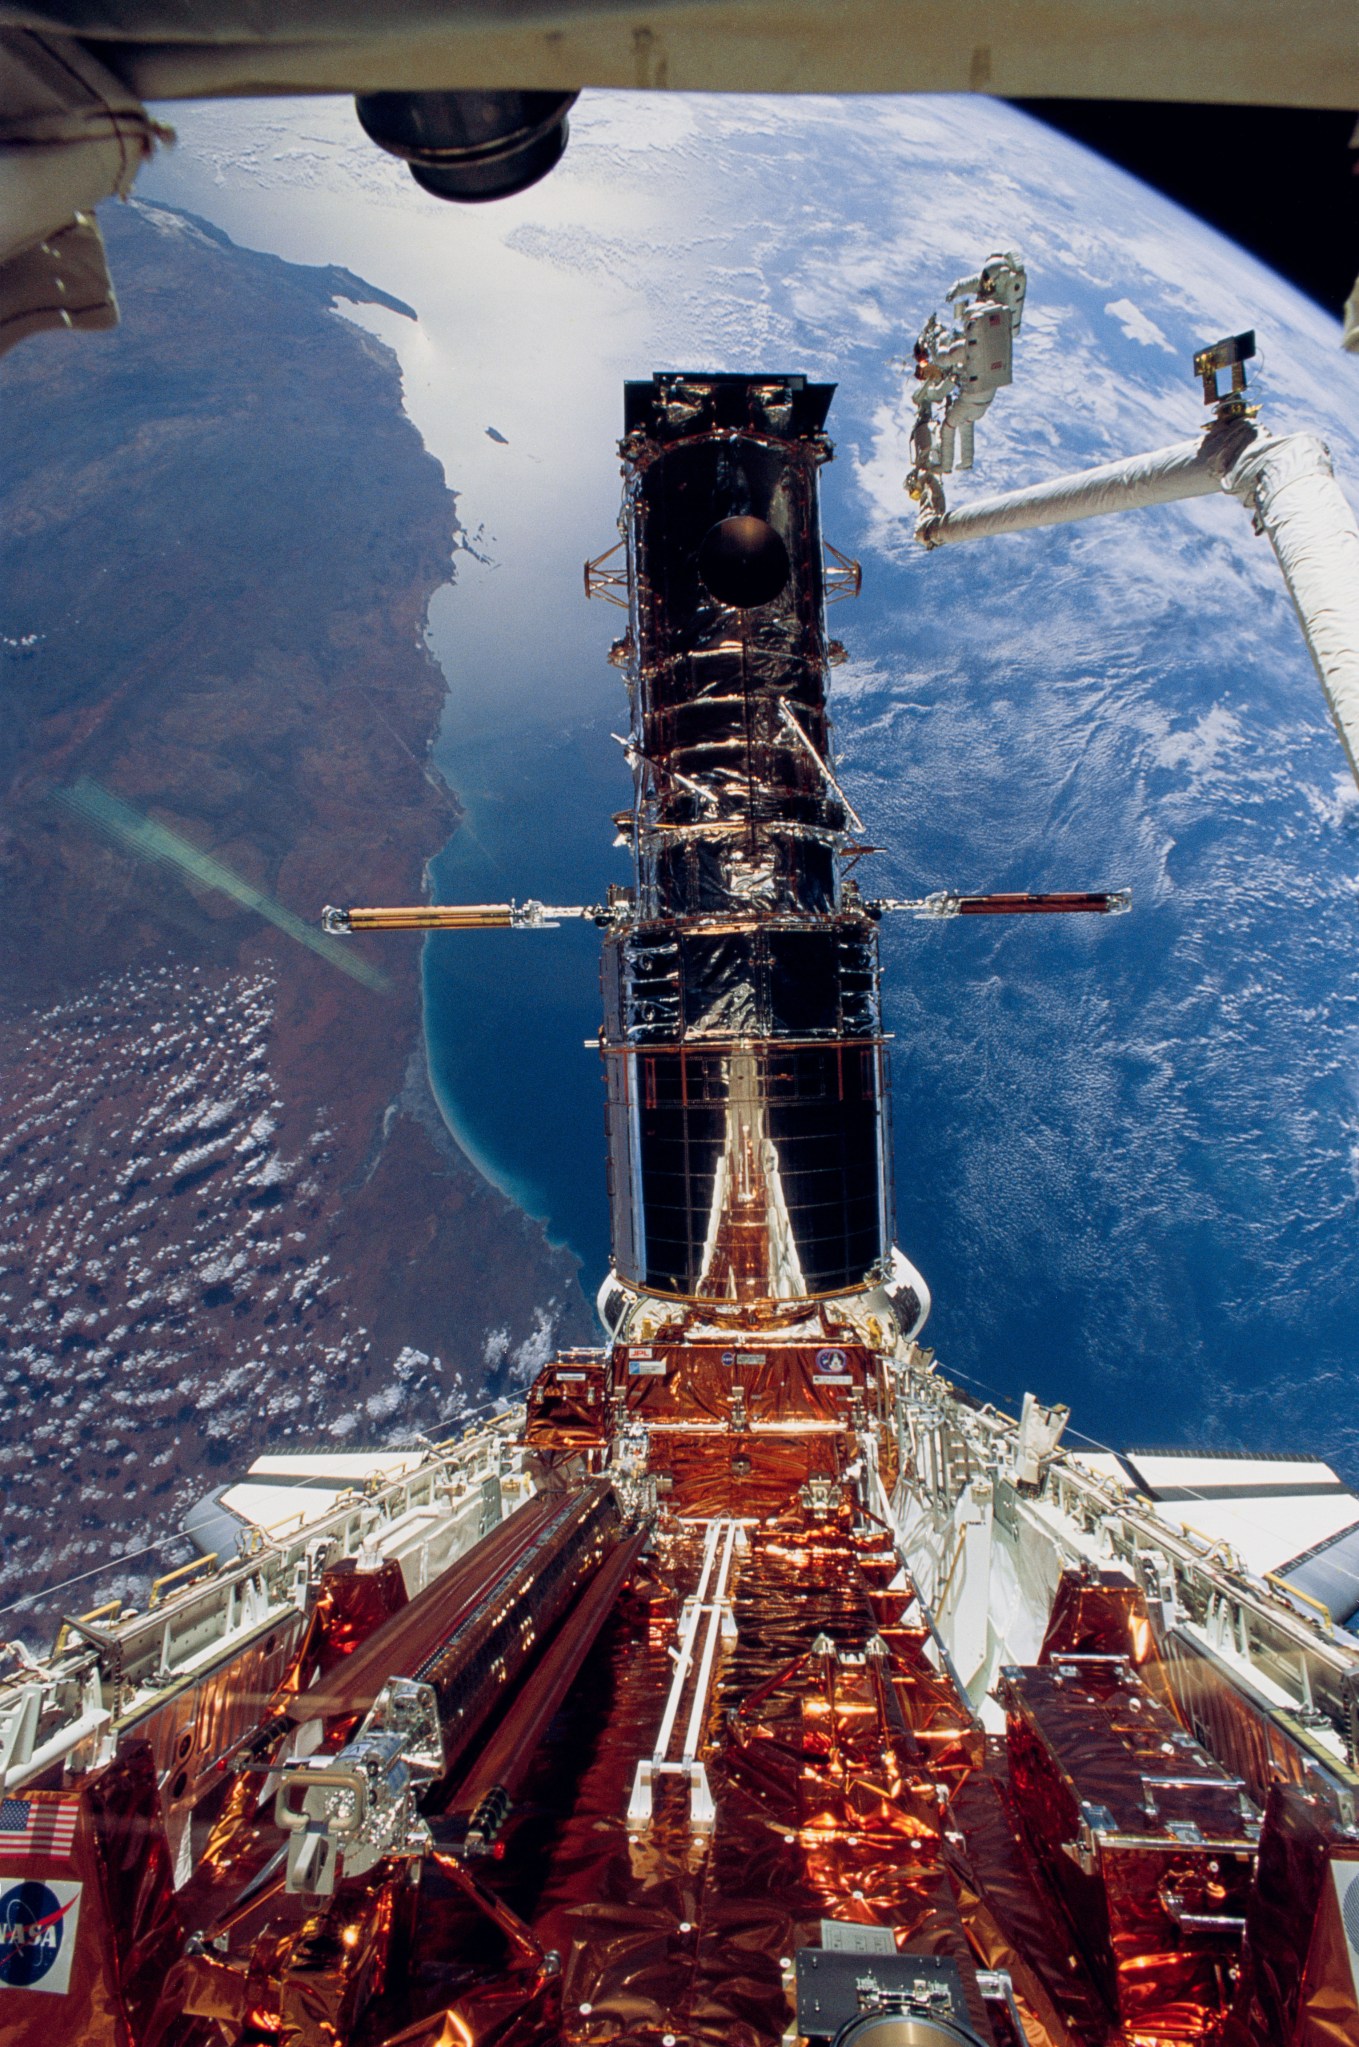 This week in 1993, the space shuttle Endeavour, mission STS-61, landed at NASA’s Kennedy Space Center.